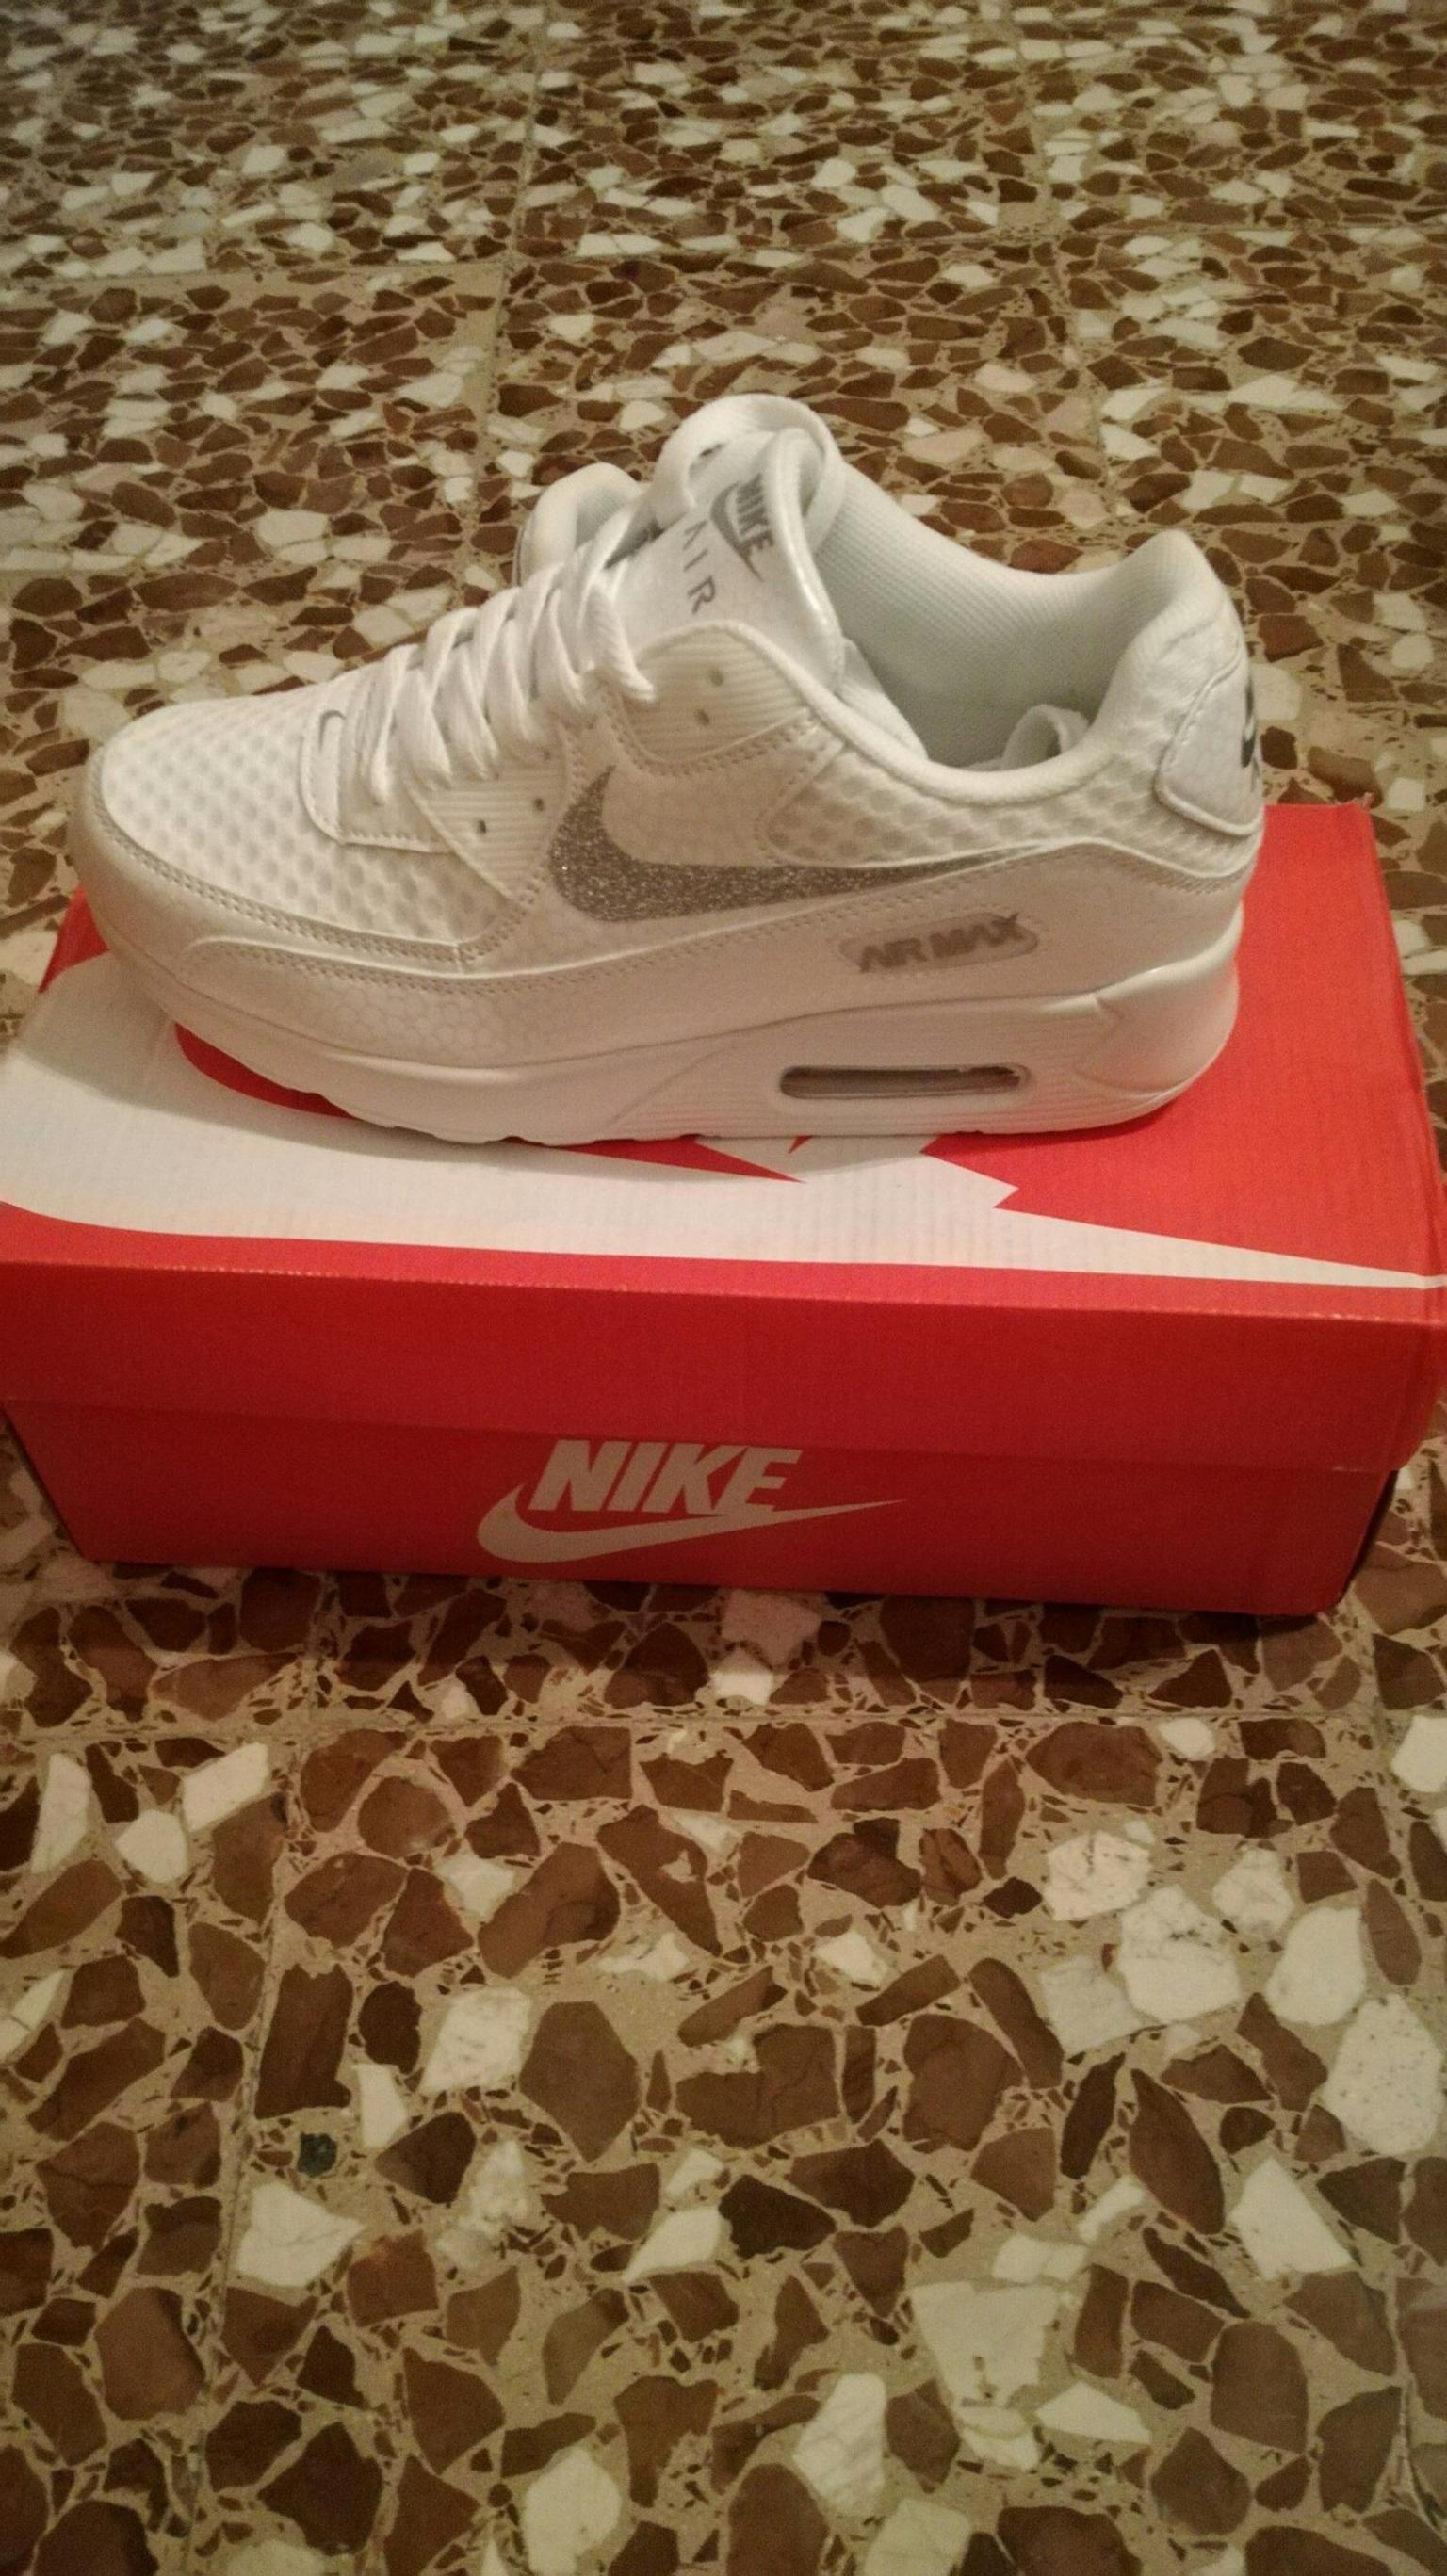 Air max donna in 20660 Rezzano for €35.00 for sale | Shpock عيون القطط